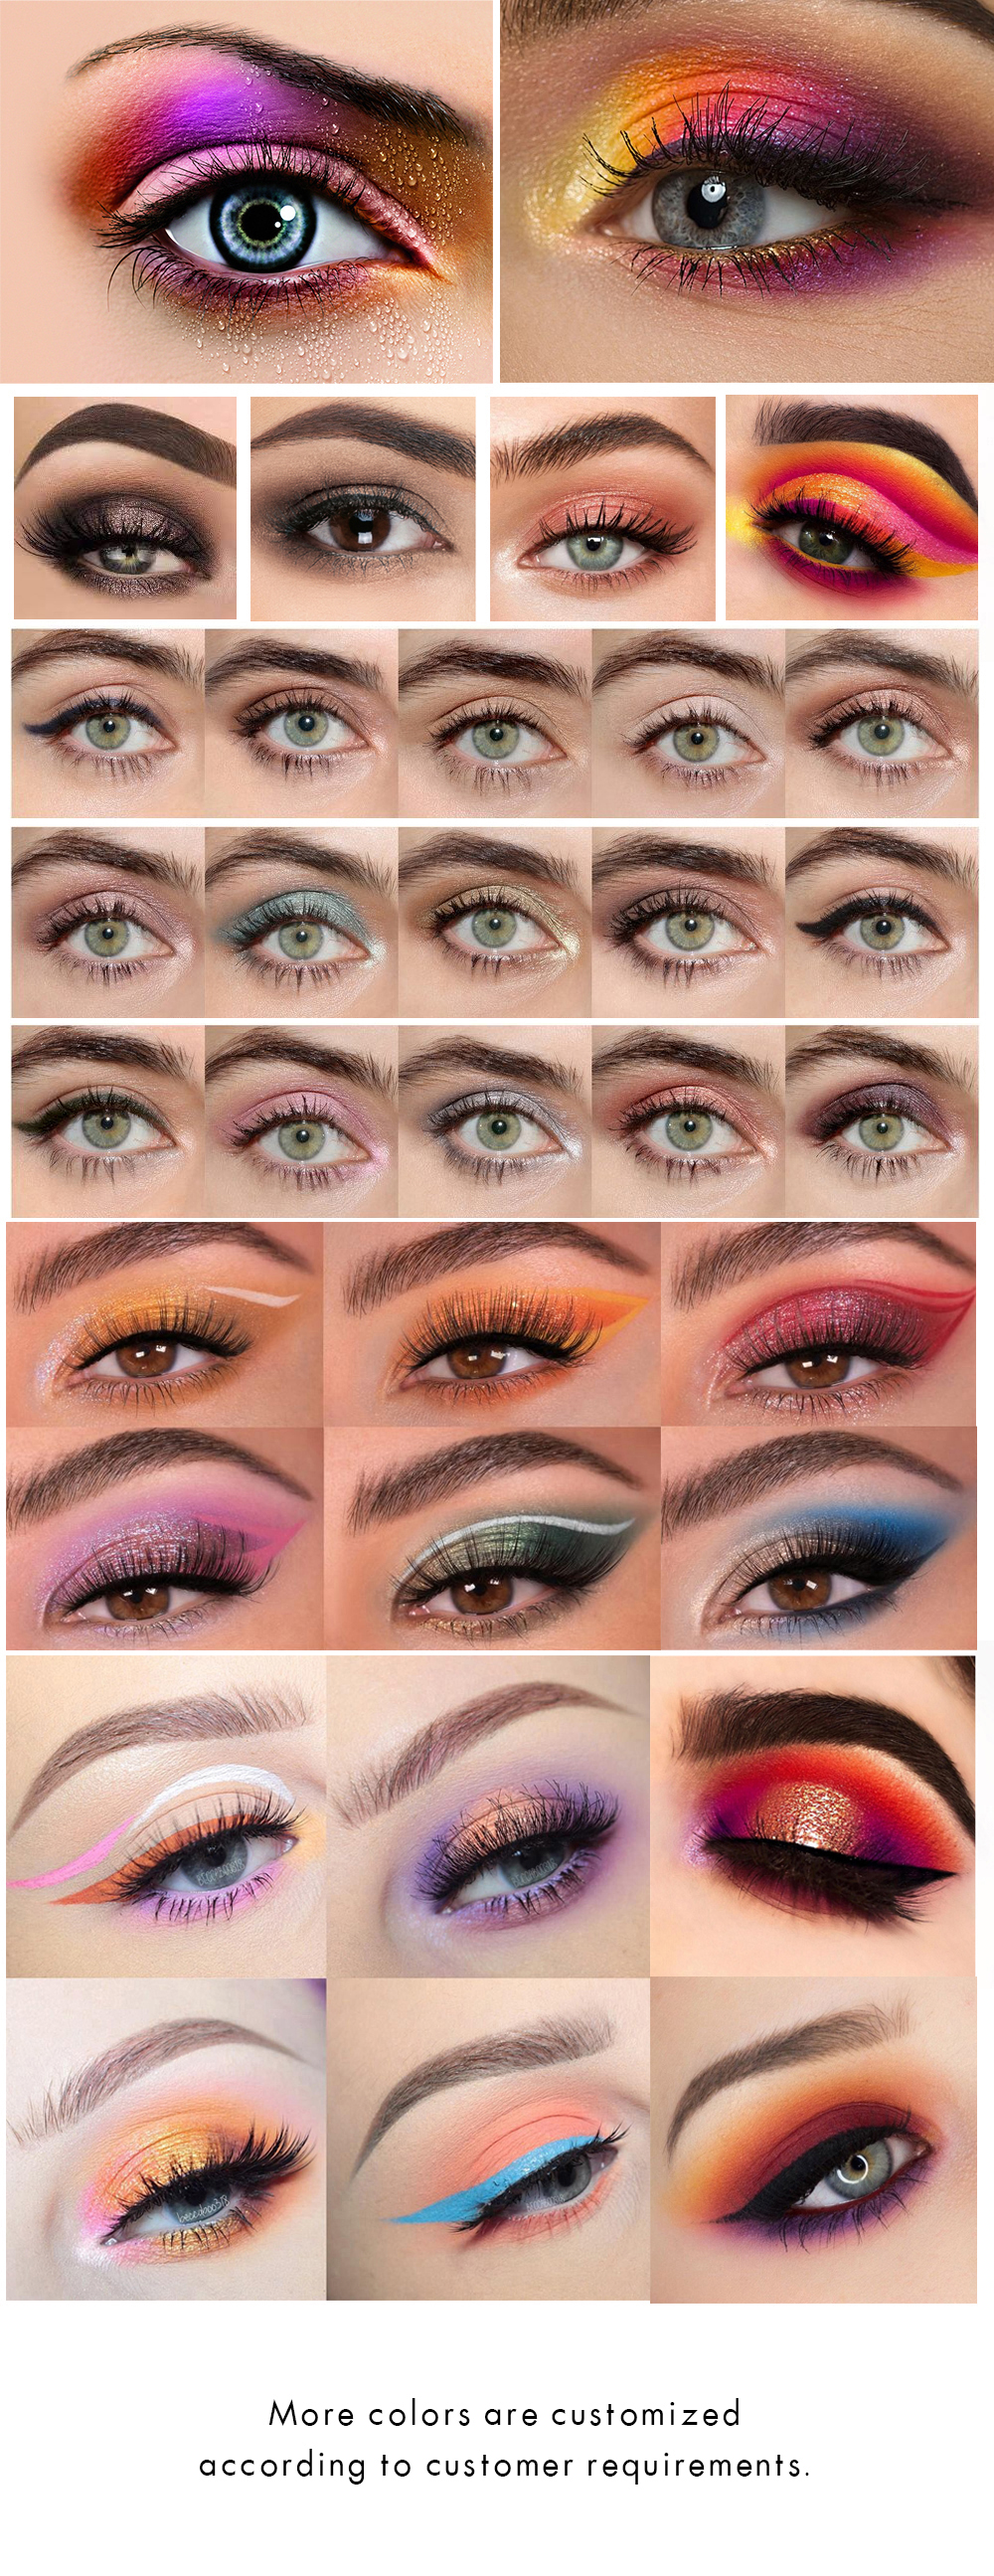 5. Thirty-color eyeshadow color card